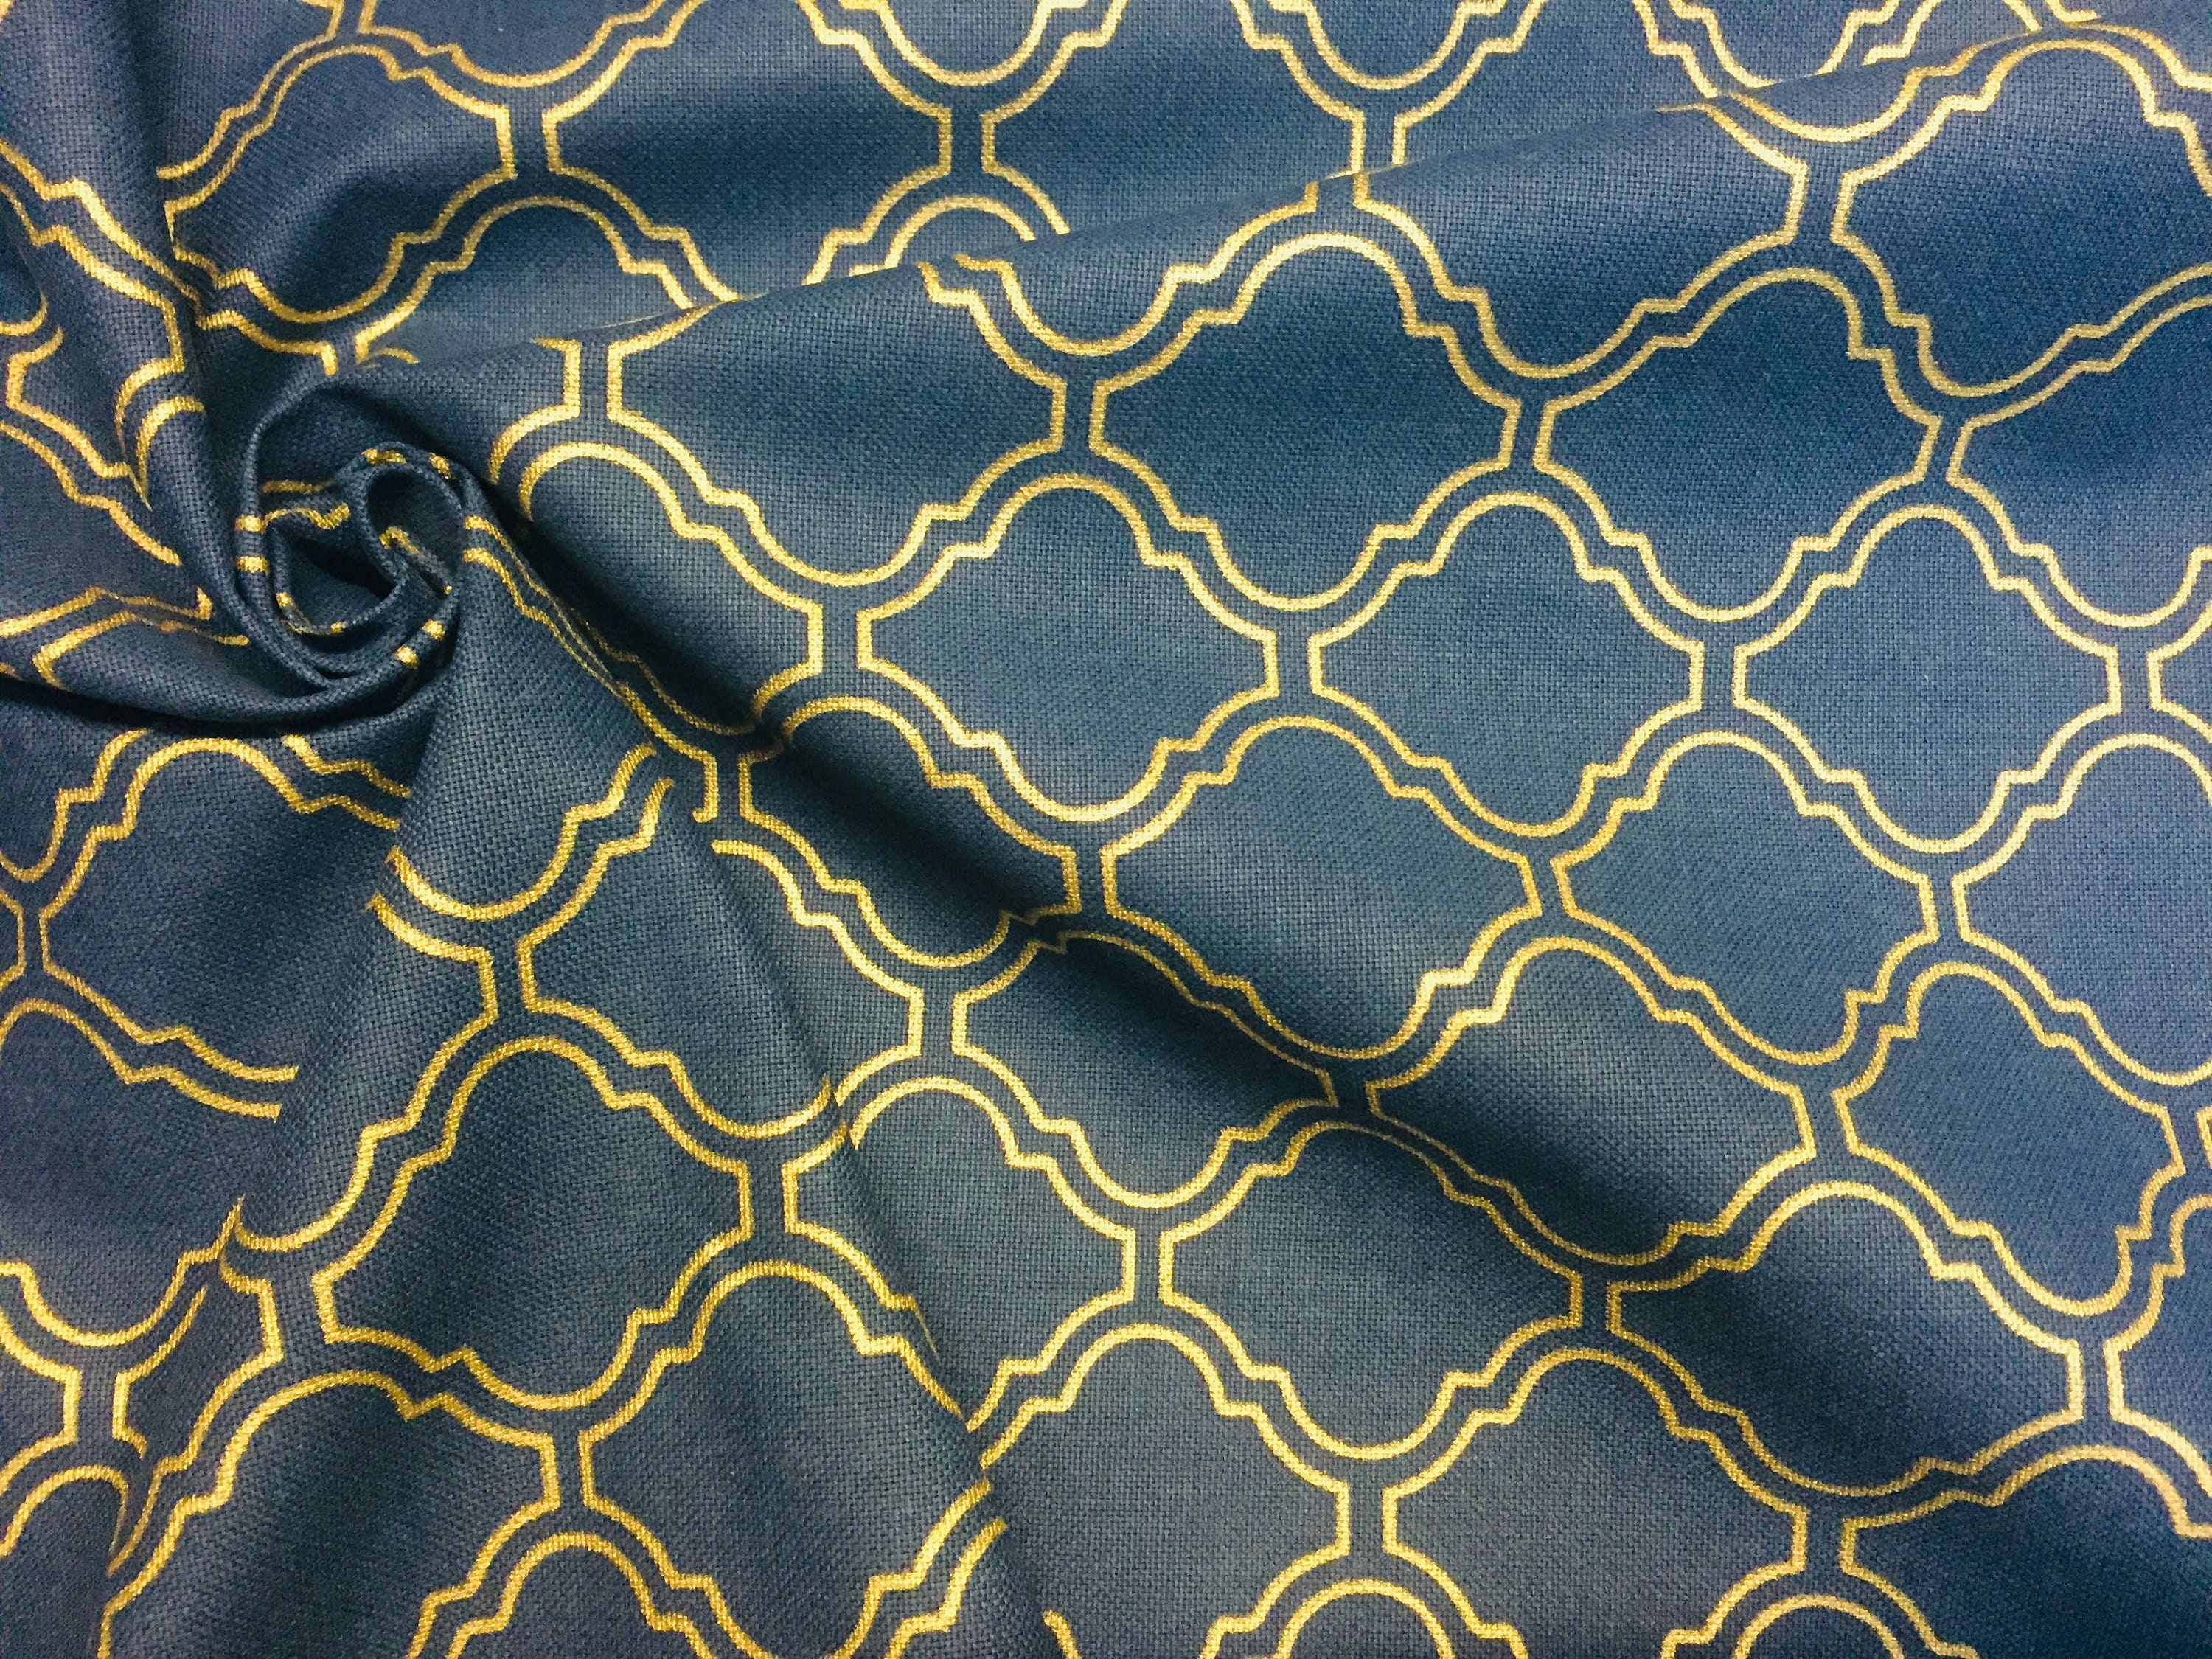 Gold Moroccan Arabic Damask Print Navy Blue Fabric for - Etsy UK